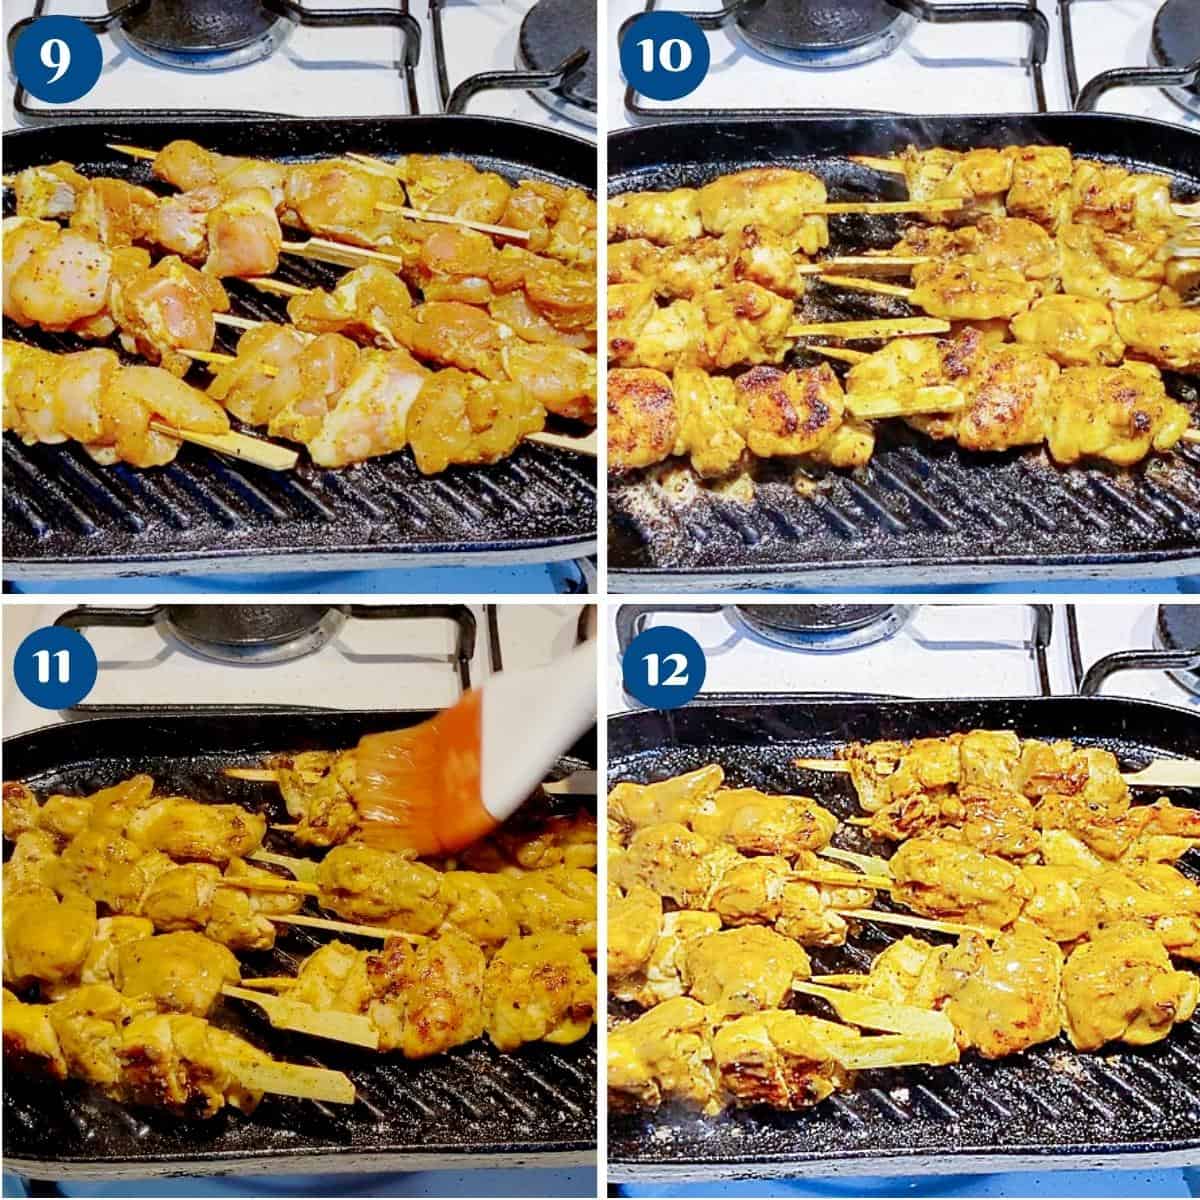 Progress pictures collage - cooking skewers on a grill.